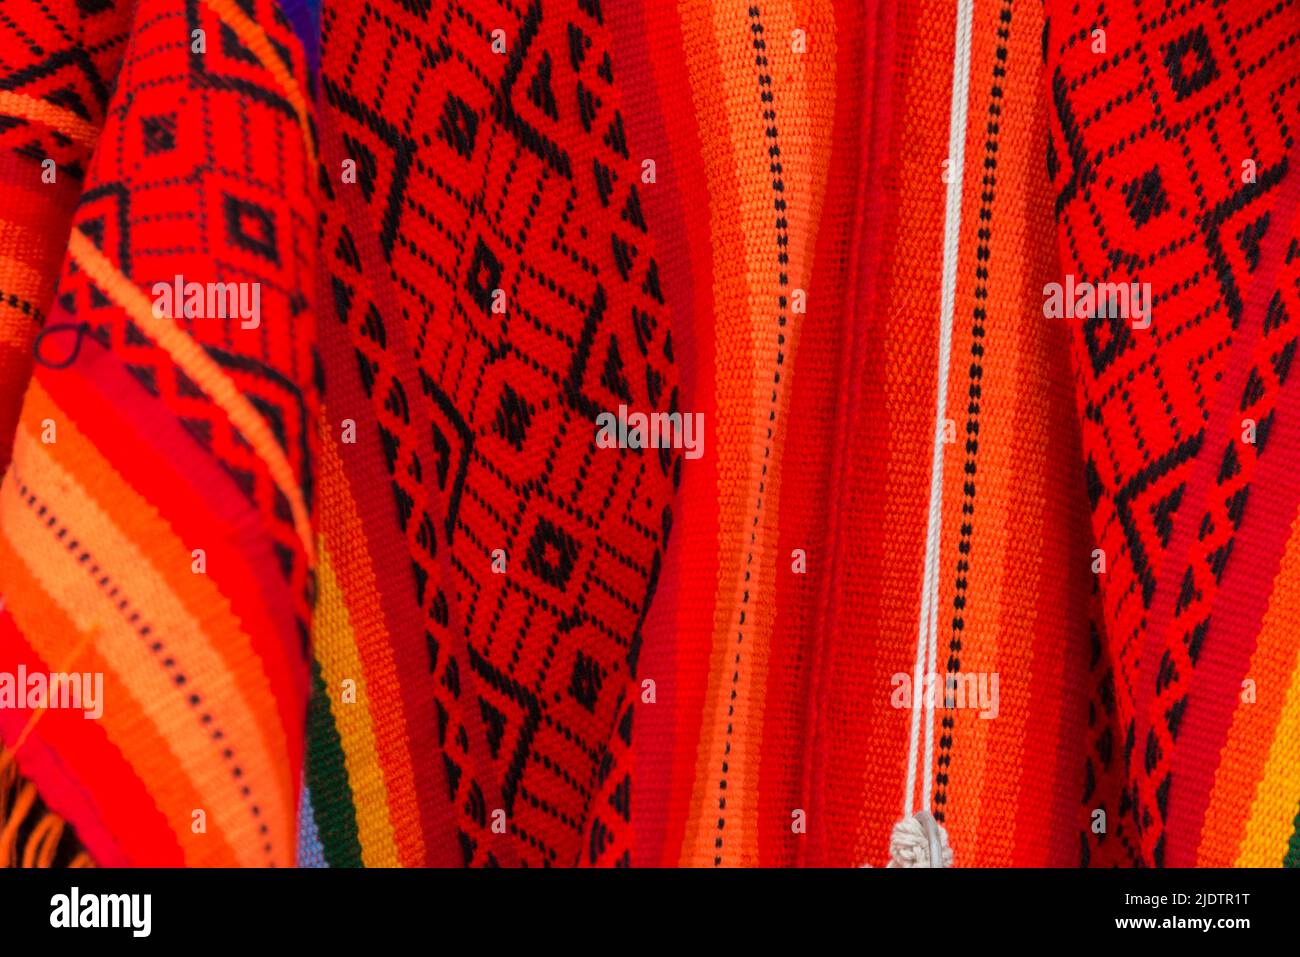 Red and black patterns over some clothes made of llama wool at Cusco souvenirs shop, Peru. Stock Photo